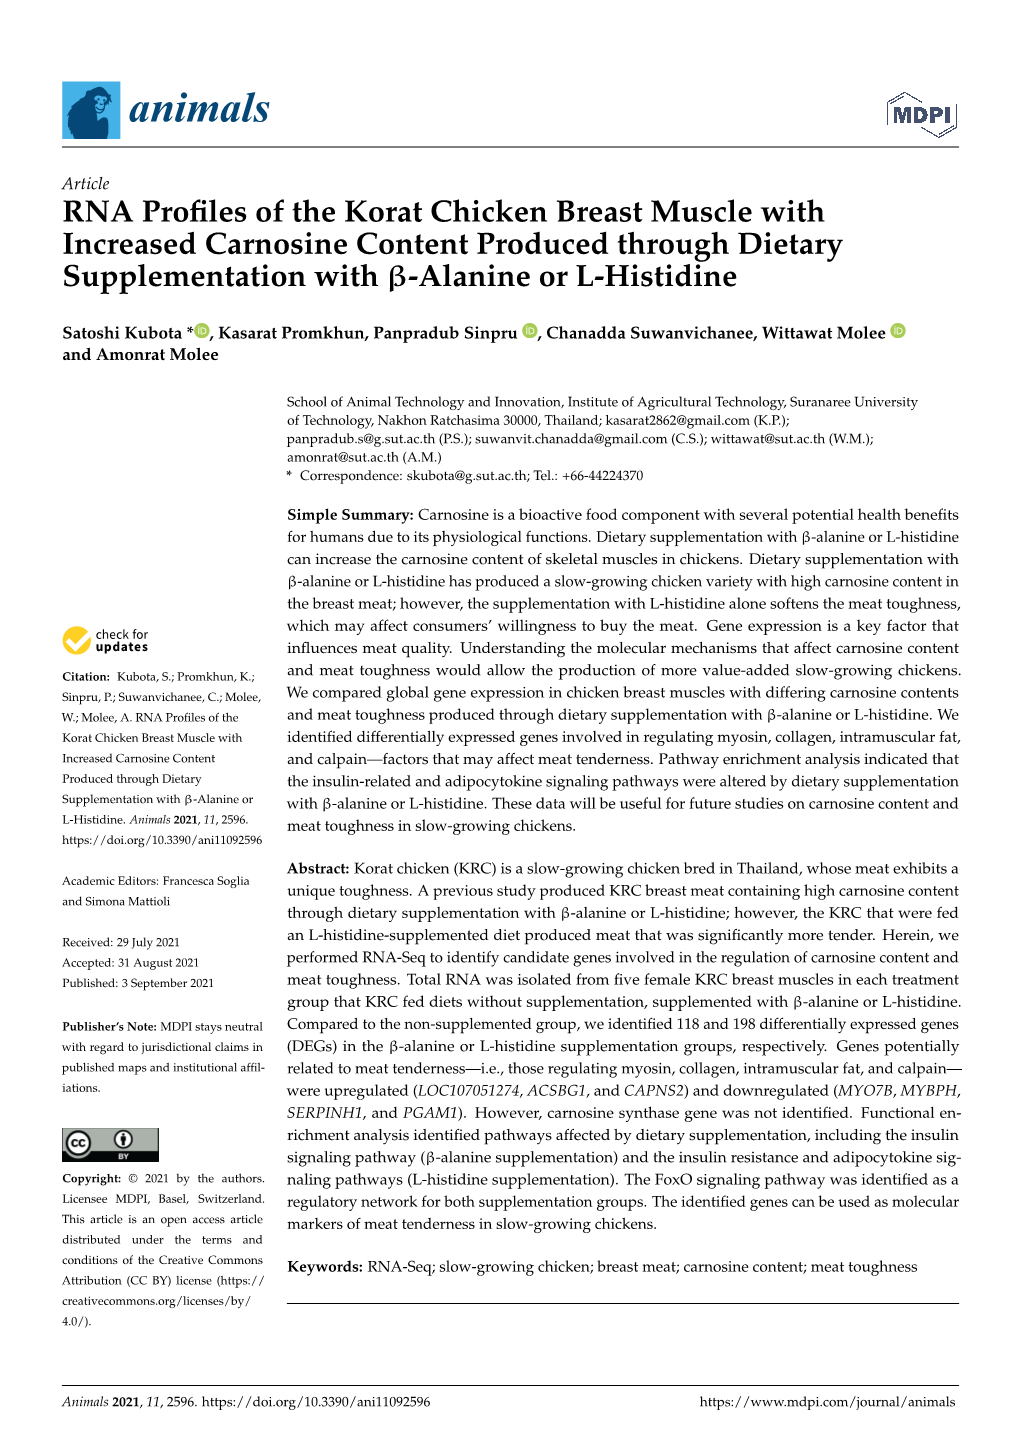 RNA Profiles of the Korat Chicken Breast Muscle with Increased Carnosine Content Produced Through Dietary Supplementation With